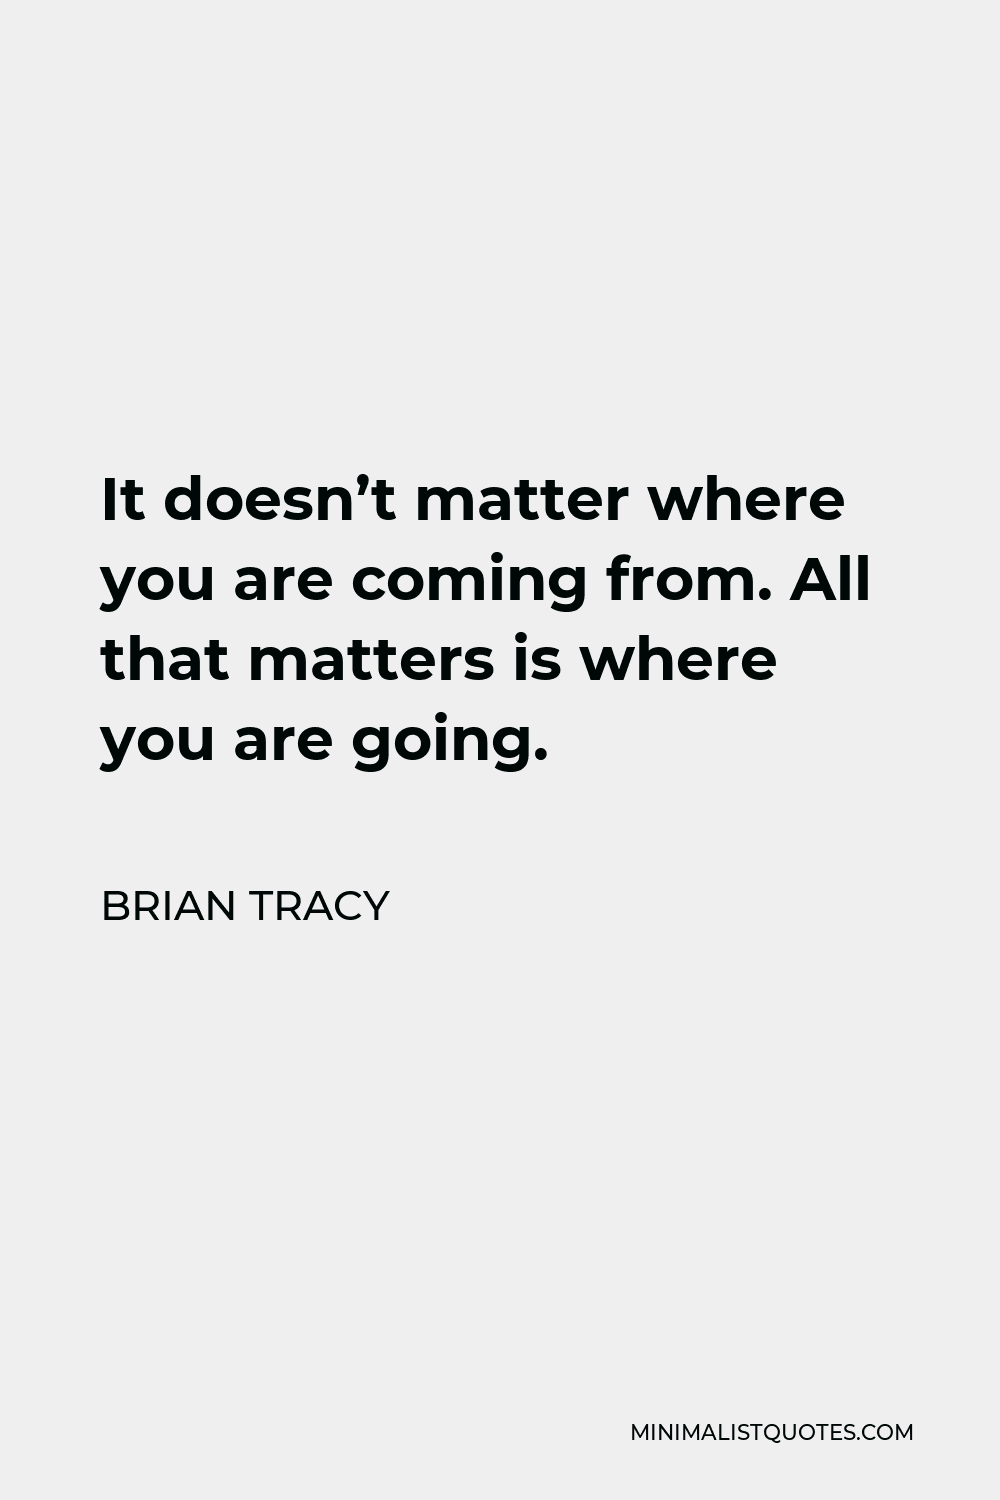 Brian Tracy Quote - It doesn’t matter where you are coming from. All that matters is where you are going.